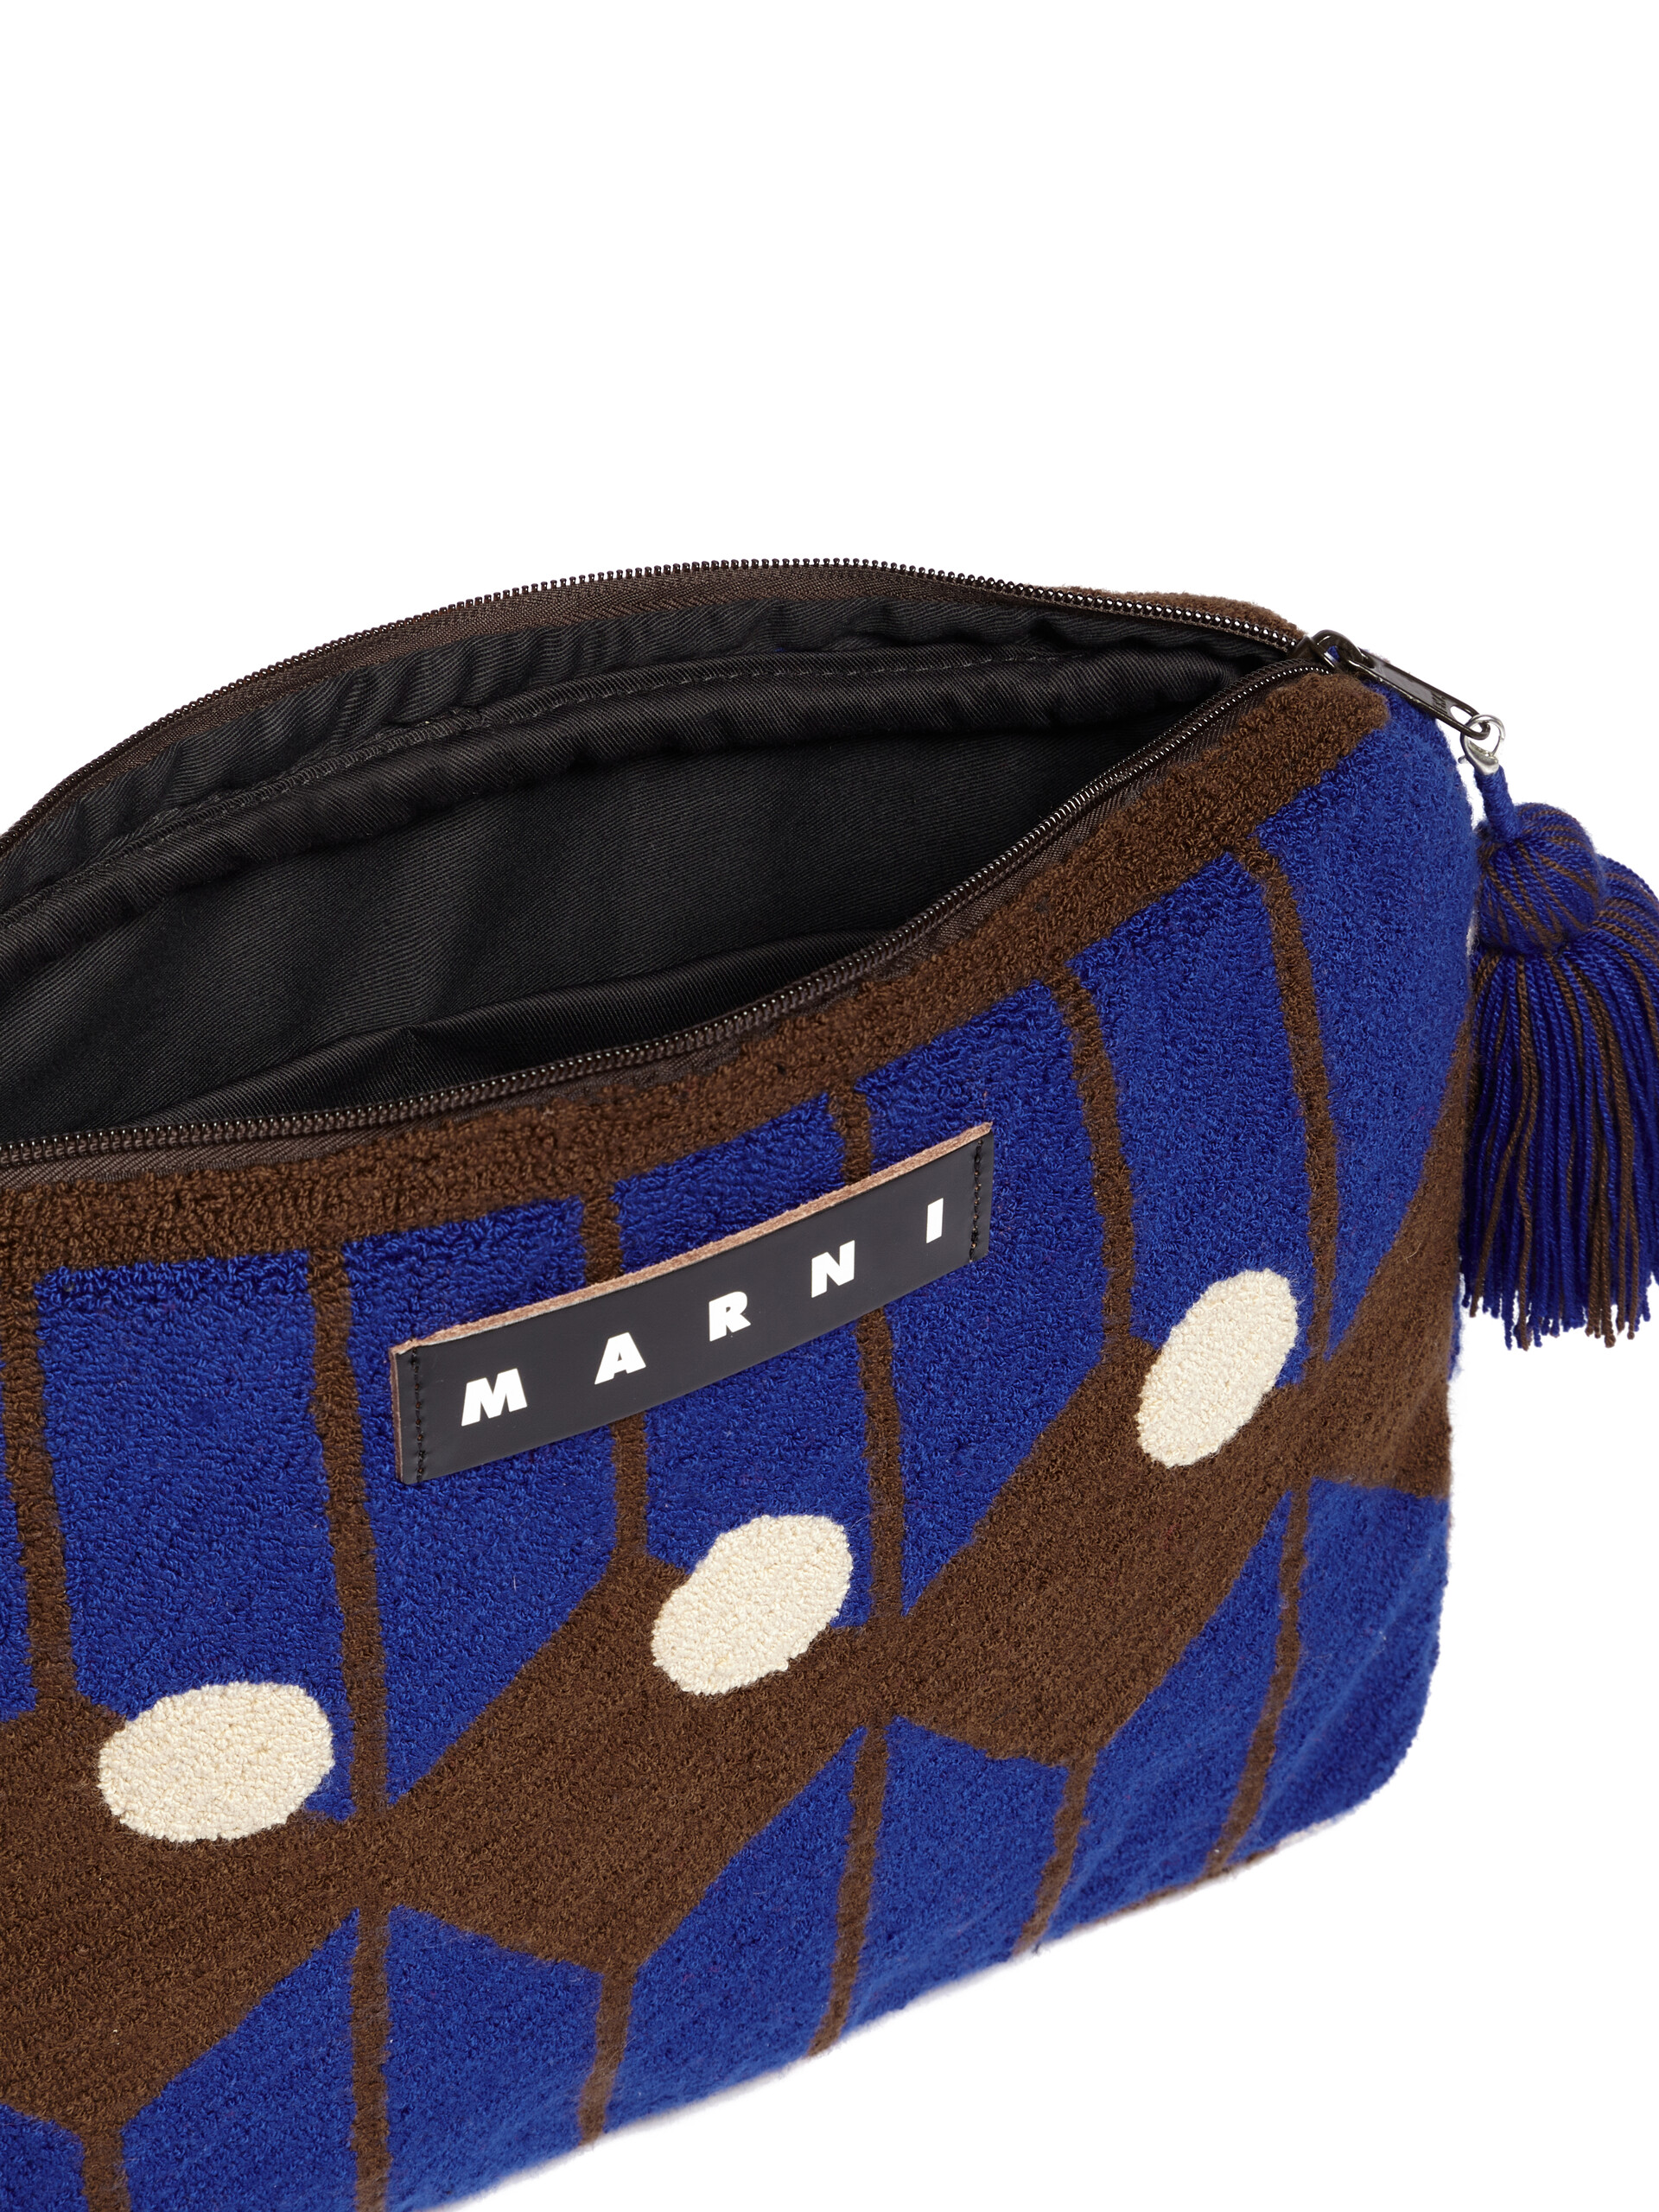 Blue and brown Marni Market wool laptop case - Bags - Image 4